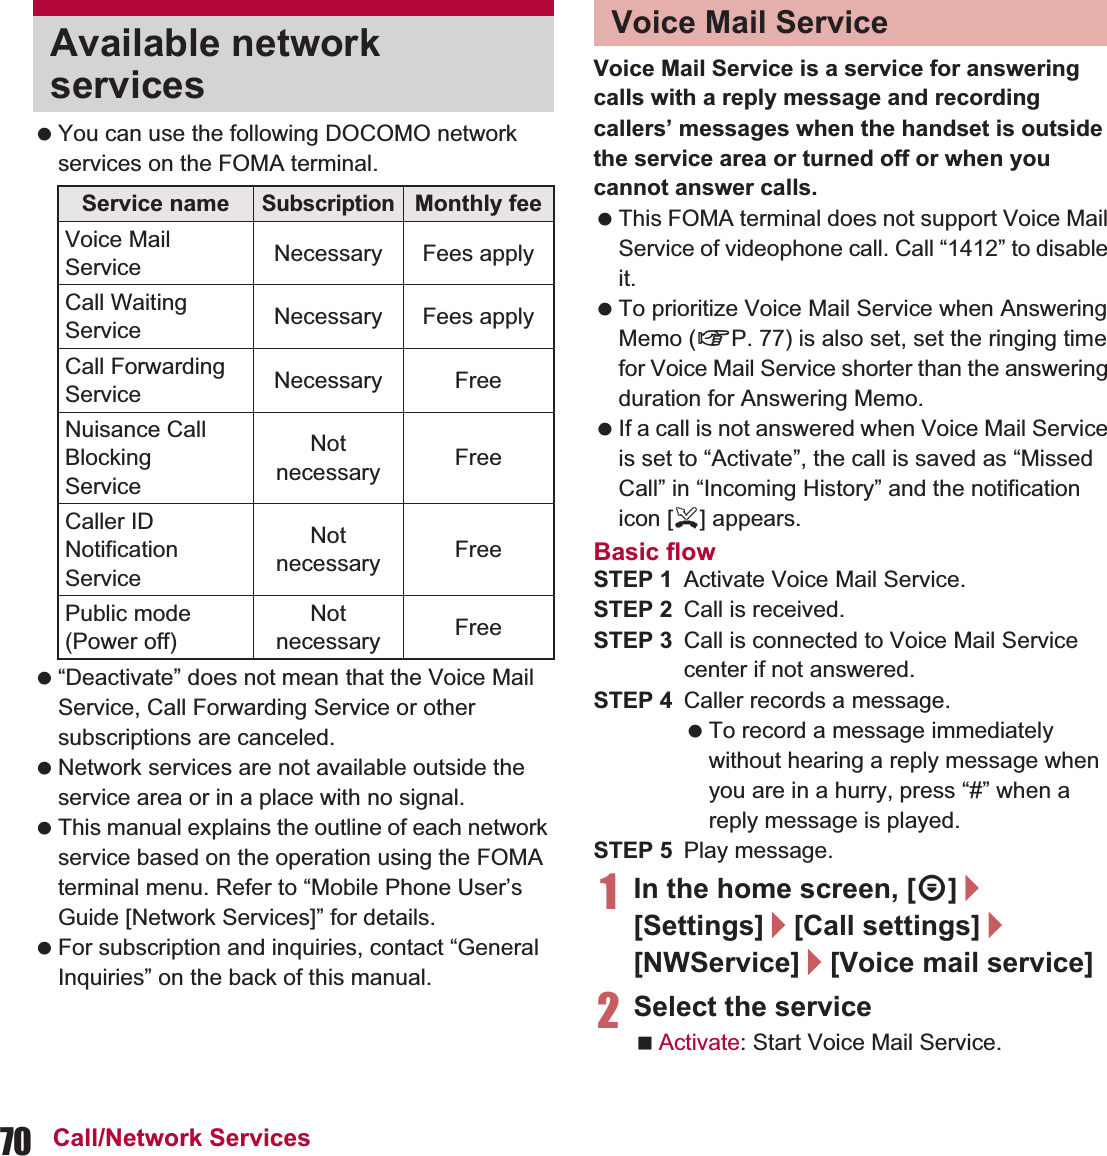 70 Call/Network Services You can use the following DOCOMO network services on the FOMA terminal. “Deactivate” does not mean that the Voice Mail Service, Call Forwarding Service or other subscriptions are canceled. Network services are not available outside the service area or in a place with no signal. This manual explains the outline of each network service based on the operation using the FOMA terminal menu. Refer to “Mobile Phone User’s Guide [Network Services]” for details. For subscription and inquiries, contact “General Inquiries” on the back of this manual.Voice Mail Service is a service for answering calls with a reply message and recording callers’ messages when the handset is outside the service area or turned off or when you cannot answer calls. This FOMA terminal does not support Voice Mail Service of videophone call. Call “1412” to disable it. To prioritize Voice Mail Service when Answering Memo (nP. 77) is also set, set the ringing time for Voice Mail Service shorter than the answering duration for Answering Memo. If a call is not answered when Voice Mail Service is set to “Activate”, the call is saved as “Missed Call” in “Incoming History” and the notification icon [+] appears.Basic flowSTEP 1 Activate Voice Mail Service.STEP 2 Call is received.STEP 3 Call is connected to Voice Mail Service center if not answered.STEP 4 Caller records a message. To record a message immediately without hearing a reply message when you are in a hurry, press “#” when a reply message is played.STEP 5 Play message.1In the home screen, [R]/[Settings]/[Call settings]/[NWService]/[Voice mail service]2Select the serviceActivate: Start Voice Mail Service.Available network servicesService nameSubscriptionMonthly feeVoice Mail Service Necessary Fees applyCall Waiting Service Necessary Fees applyCall Forwarding Service Necessary FreeNuisance Call BlockingServiceNot necessary FreeCaller ID Notification ServiceNot necessary FreePublic mode (Power off)Not necessary FreeVoice Mail Service